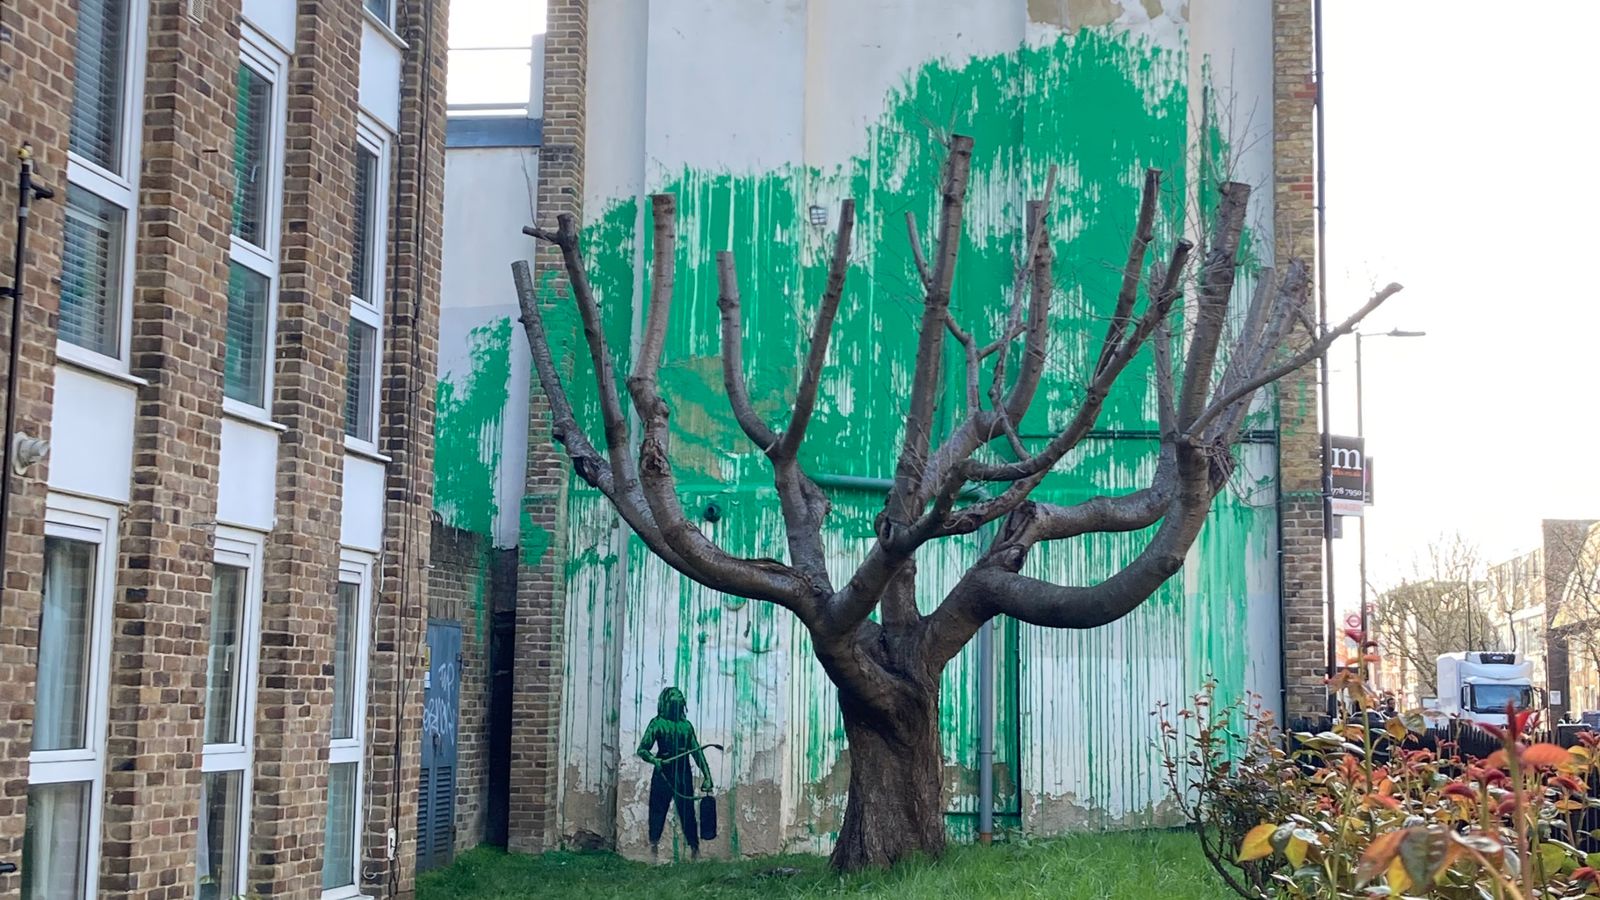 Banksy artwork appears on side of flats in north London